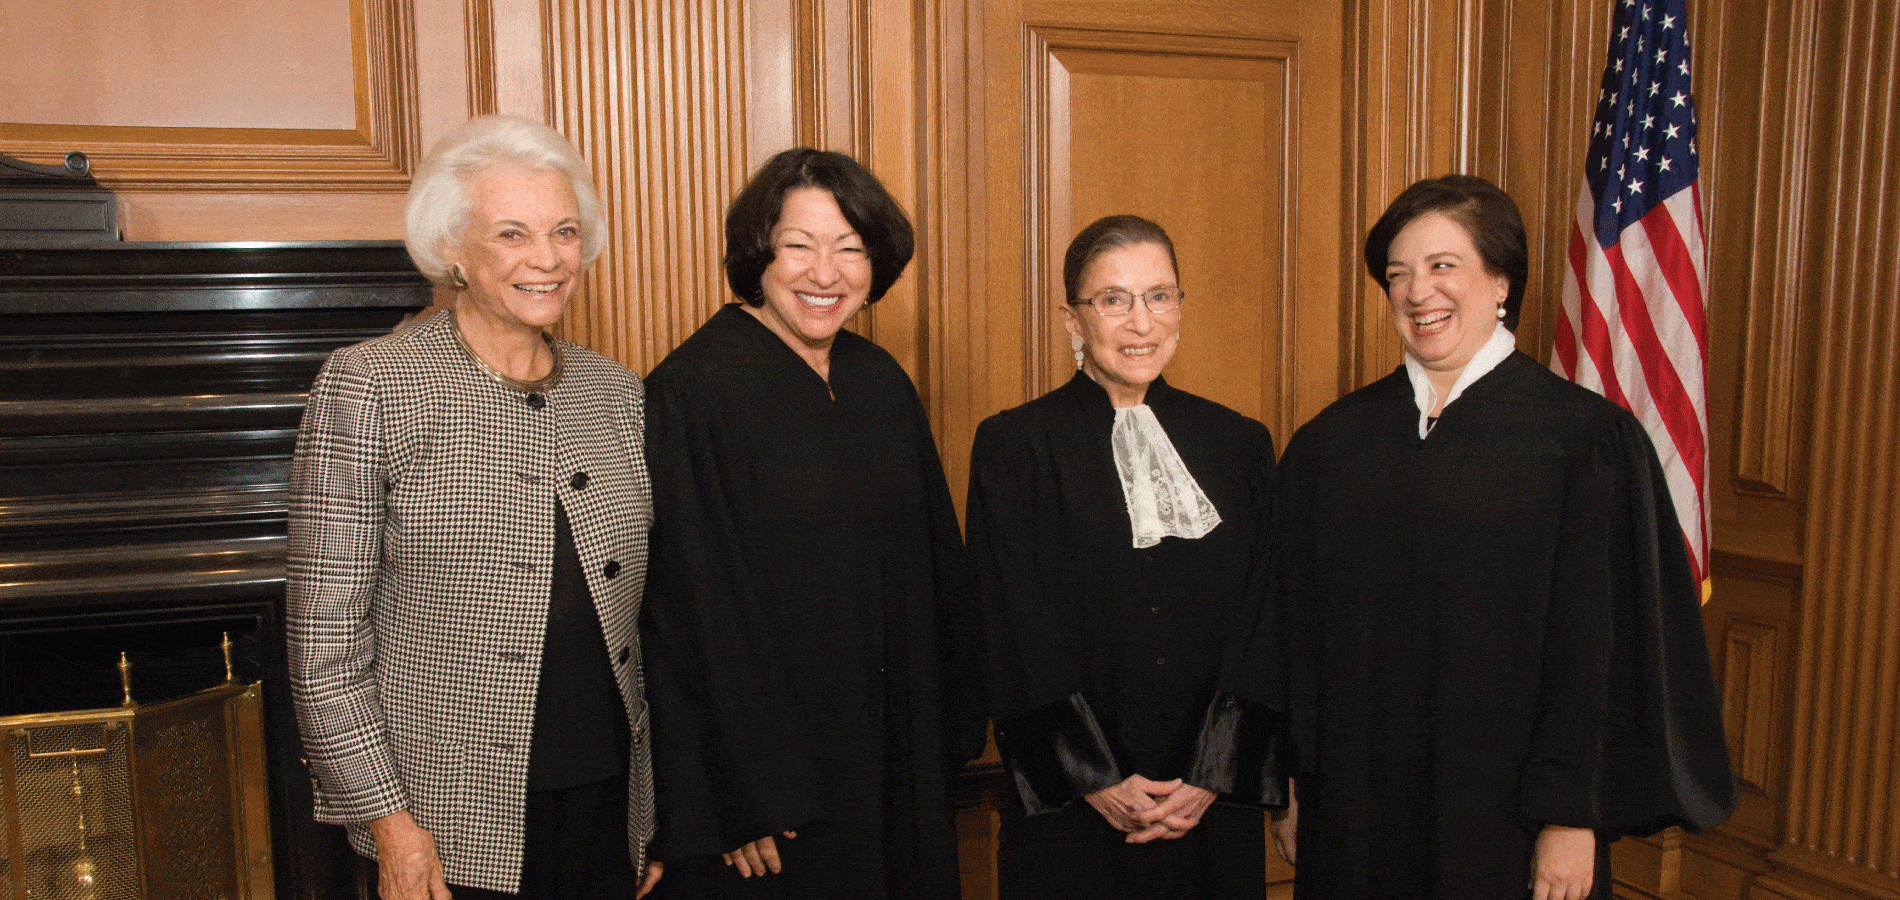 The four women who have served on the Supreme Court of the United States. From left to right: Justice Sandra Day O'Connor (Ret.), Justice Sonia Sotomayor, Justice Ruth Bader Ginsburg, and Justice Elena Kagan